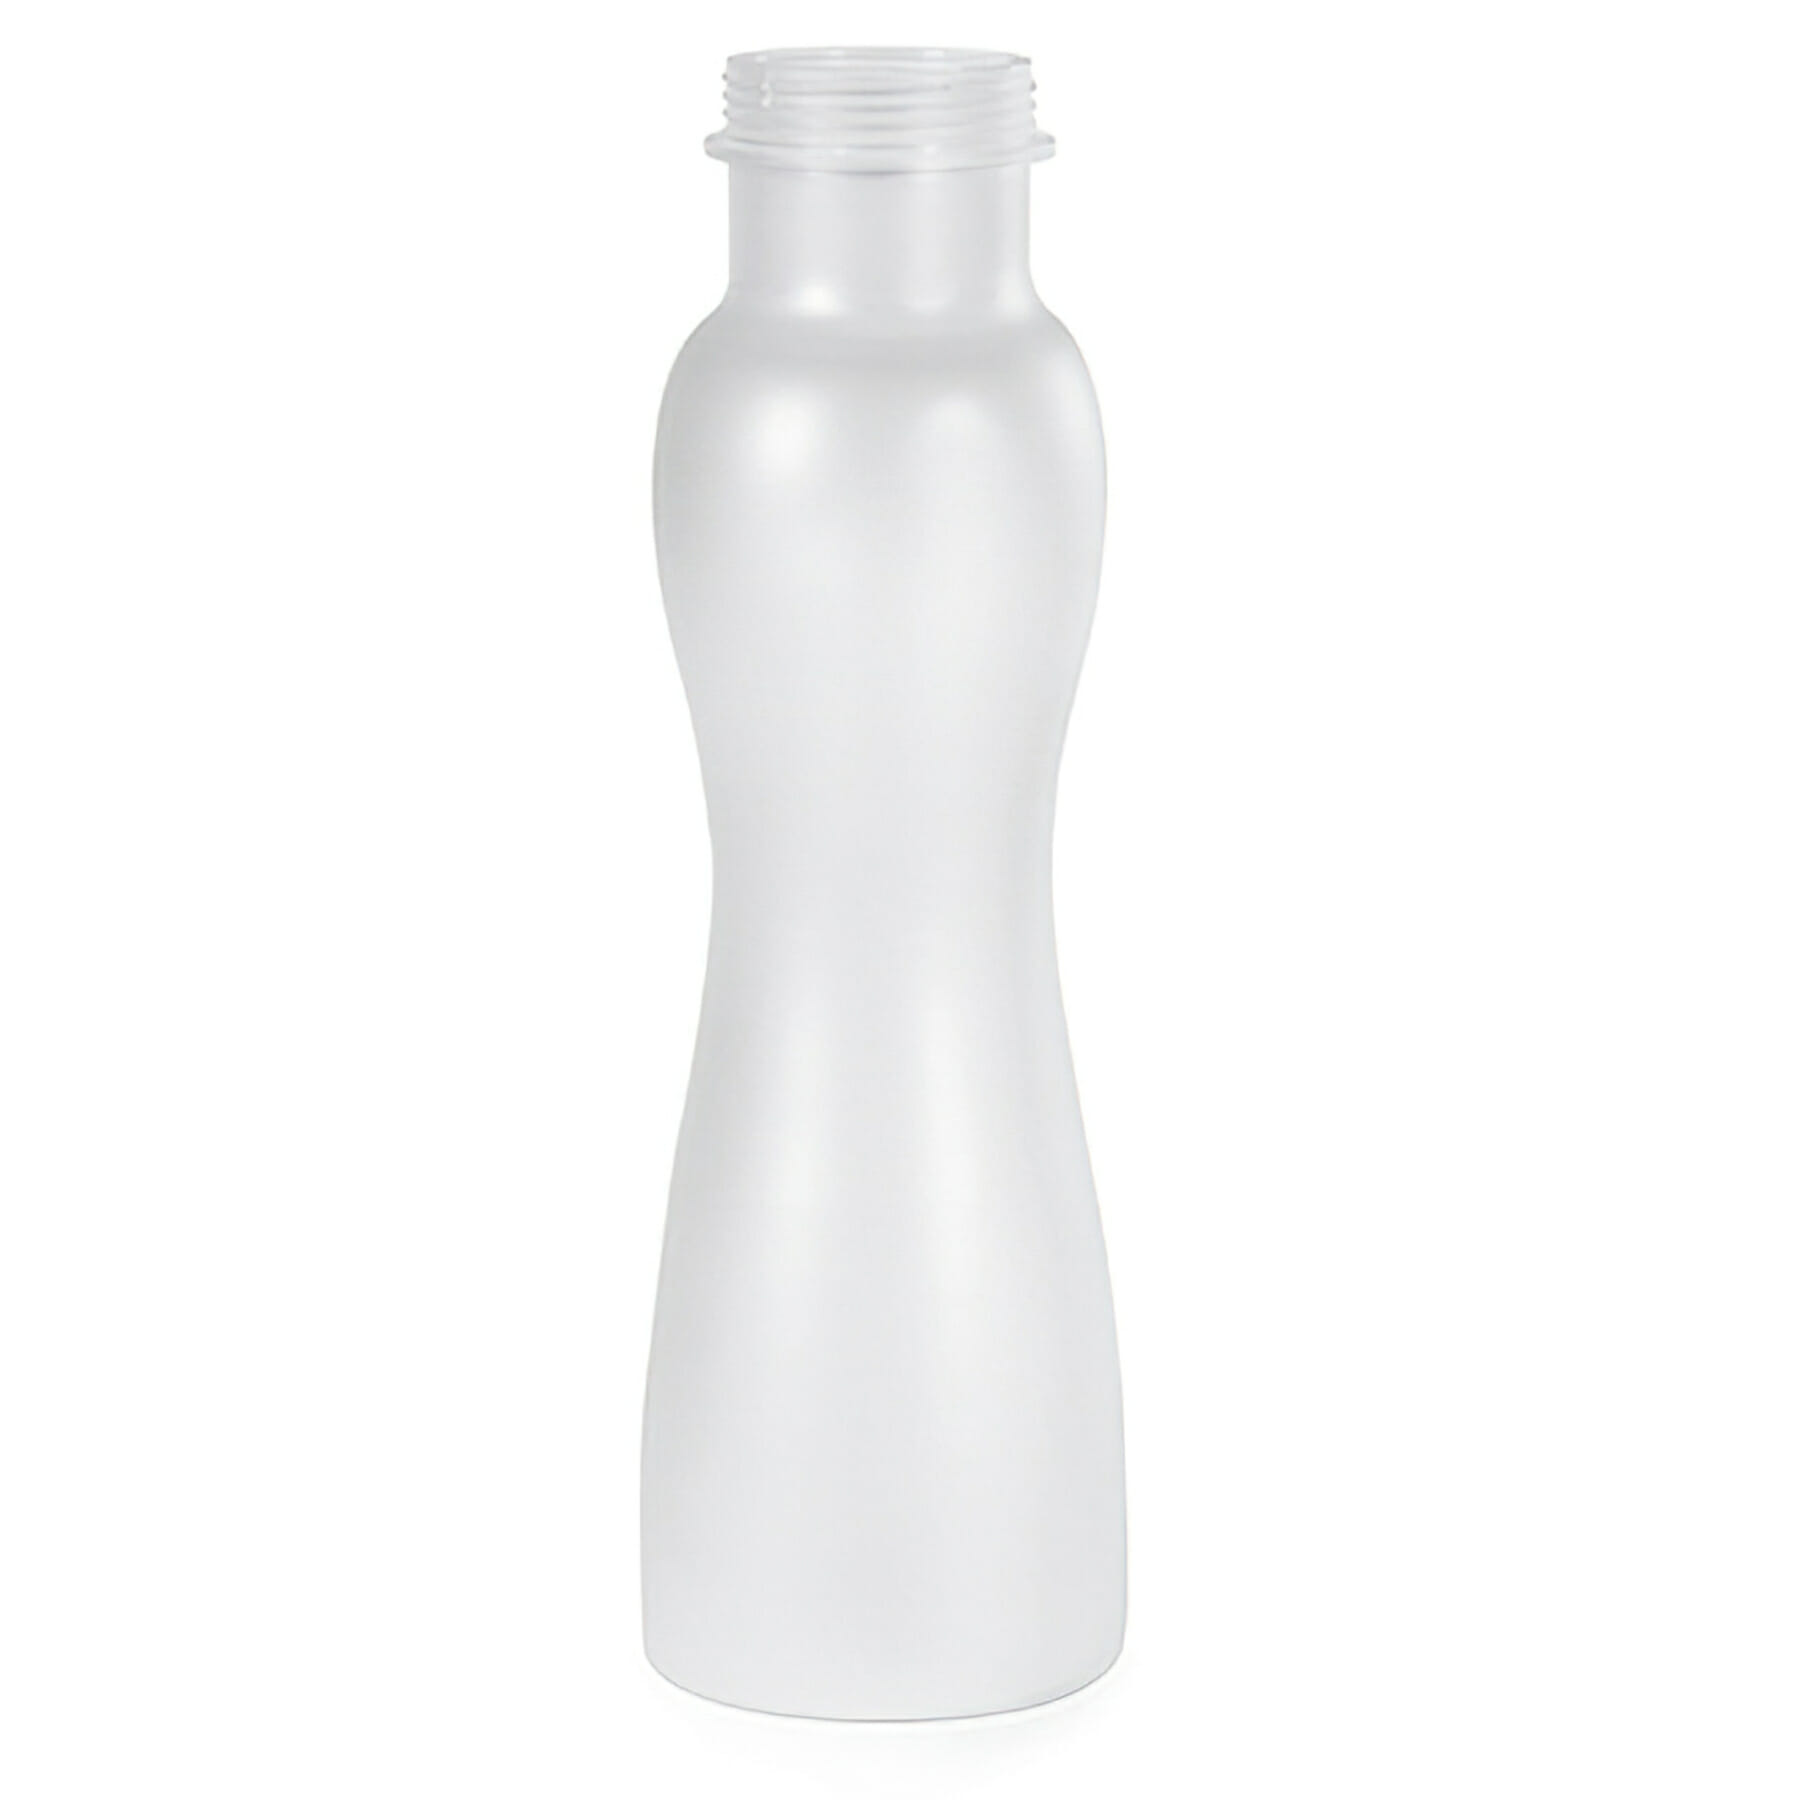 32 oz. Salad Dressing Bottle, 10.8" Tall (Bottle Only), Frosted Clear